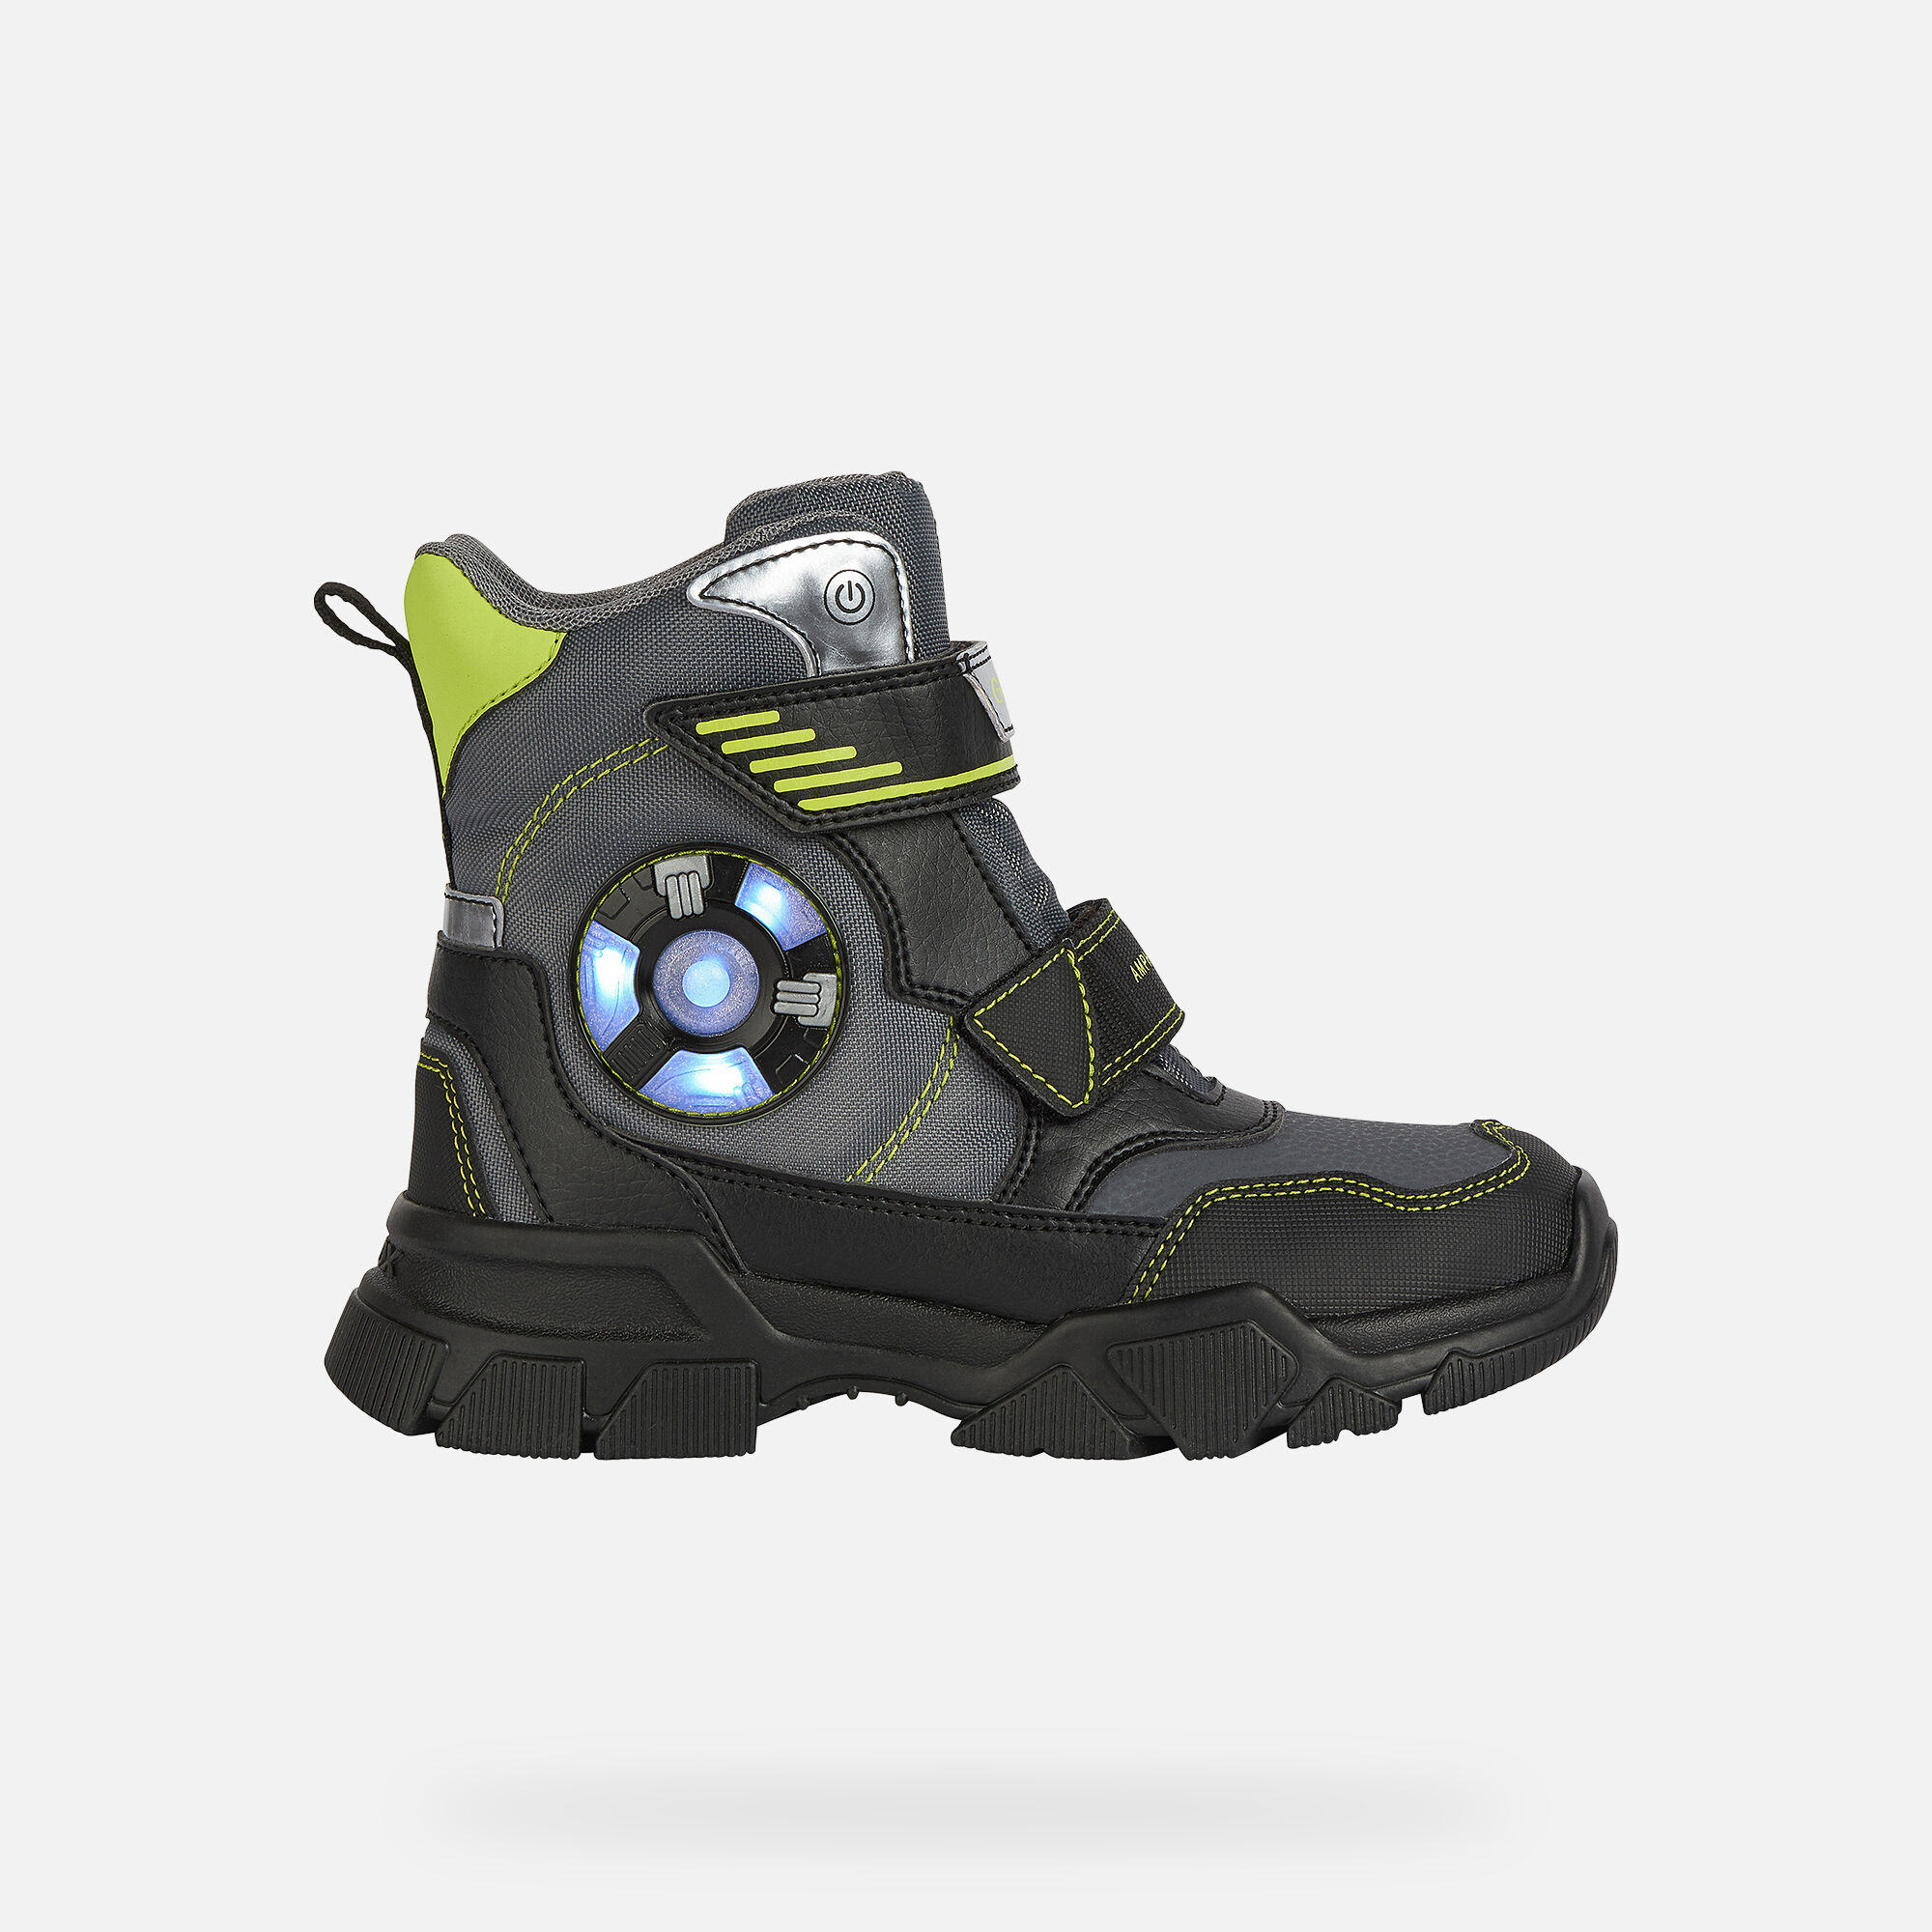 NEVEGAL ABX BOY - LIGHT-UP SHOES from 